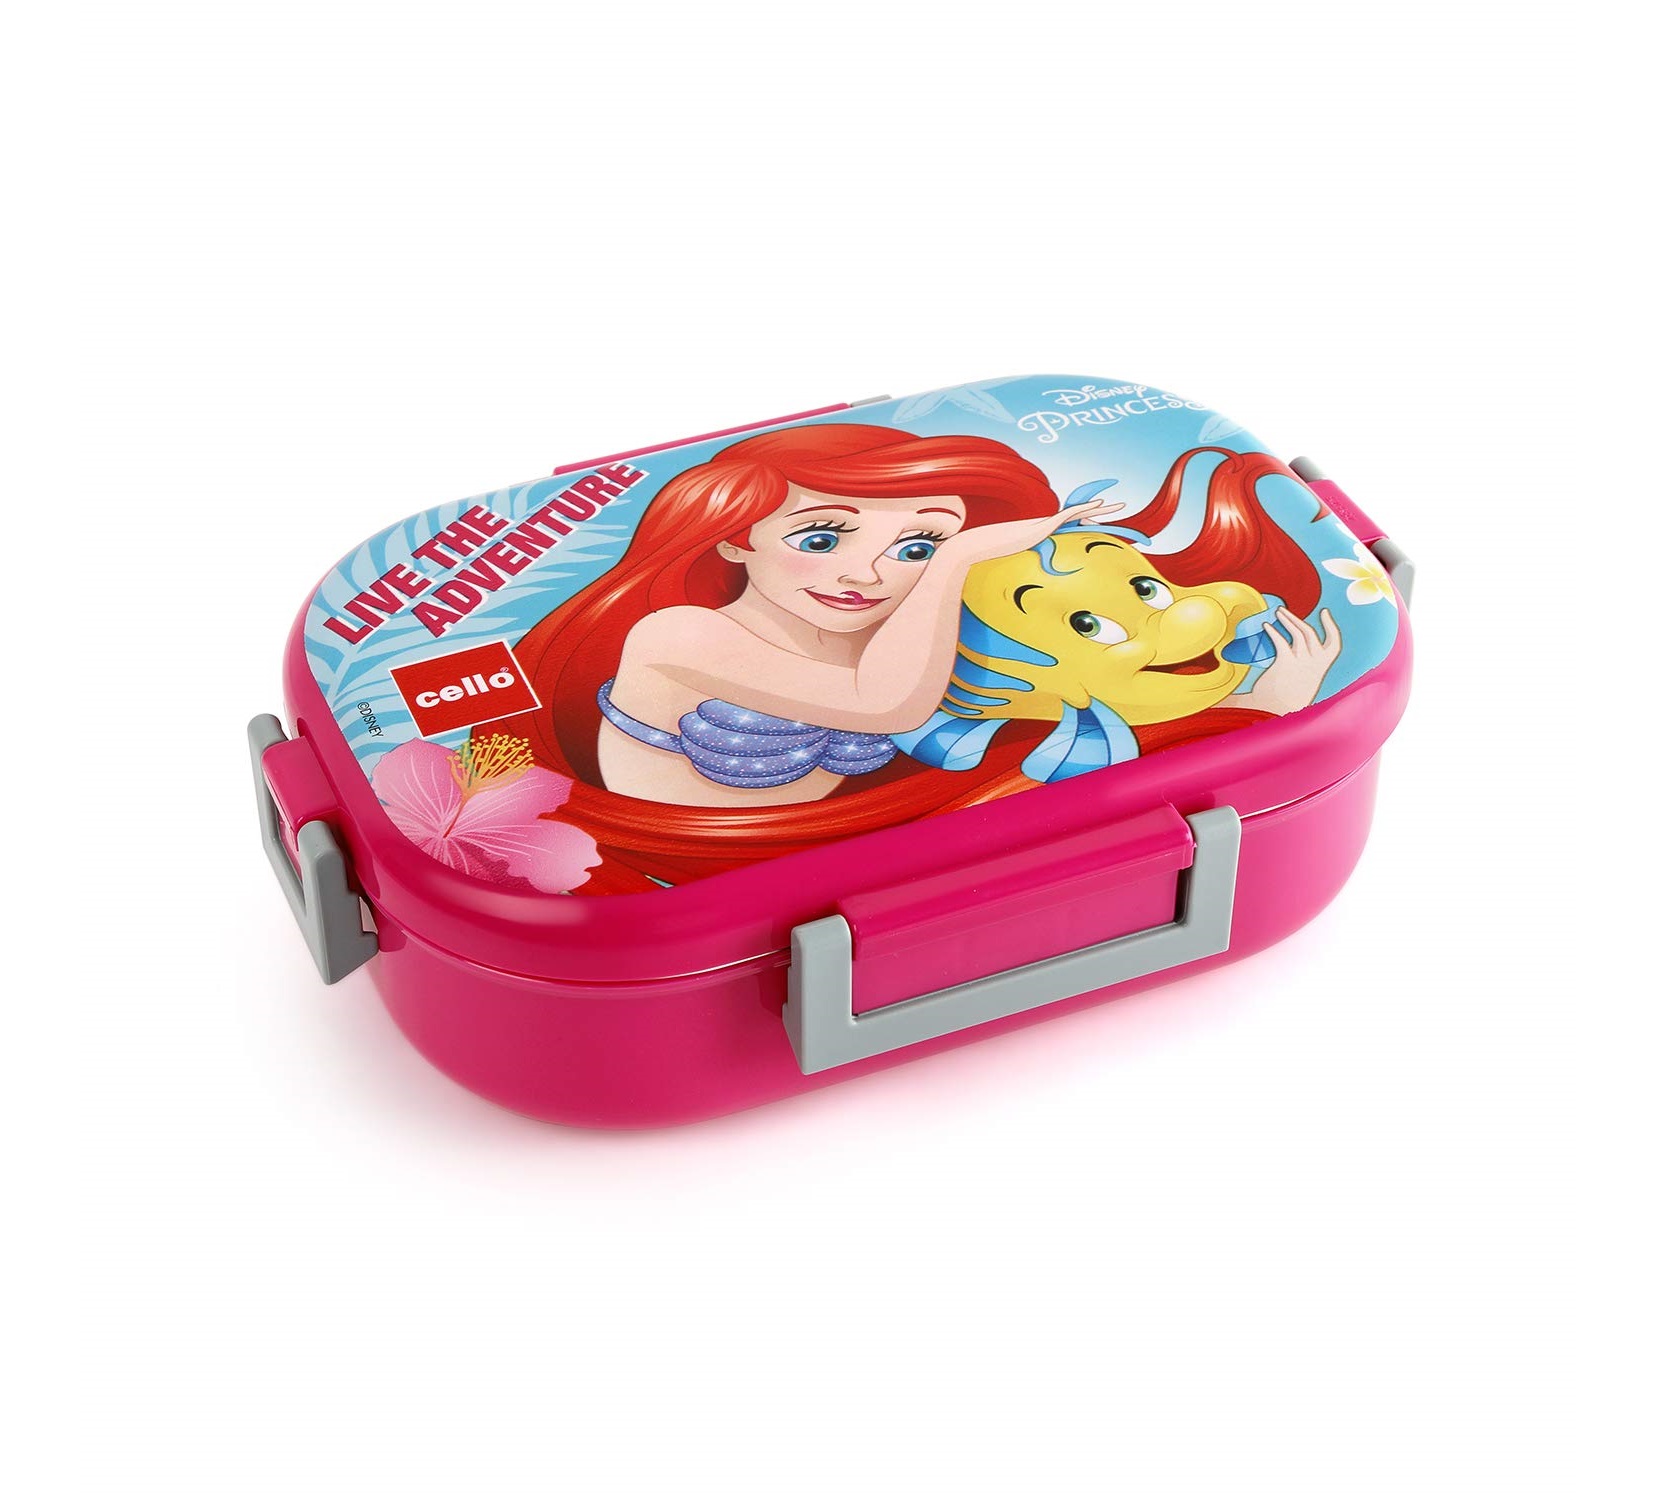 Cello Feast Deluxe Princess Design Steel Lunch Box (750ml, Pink)